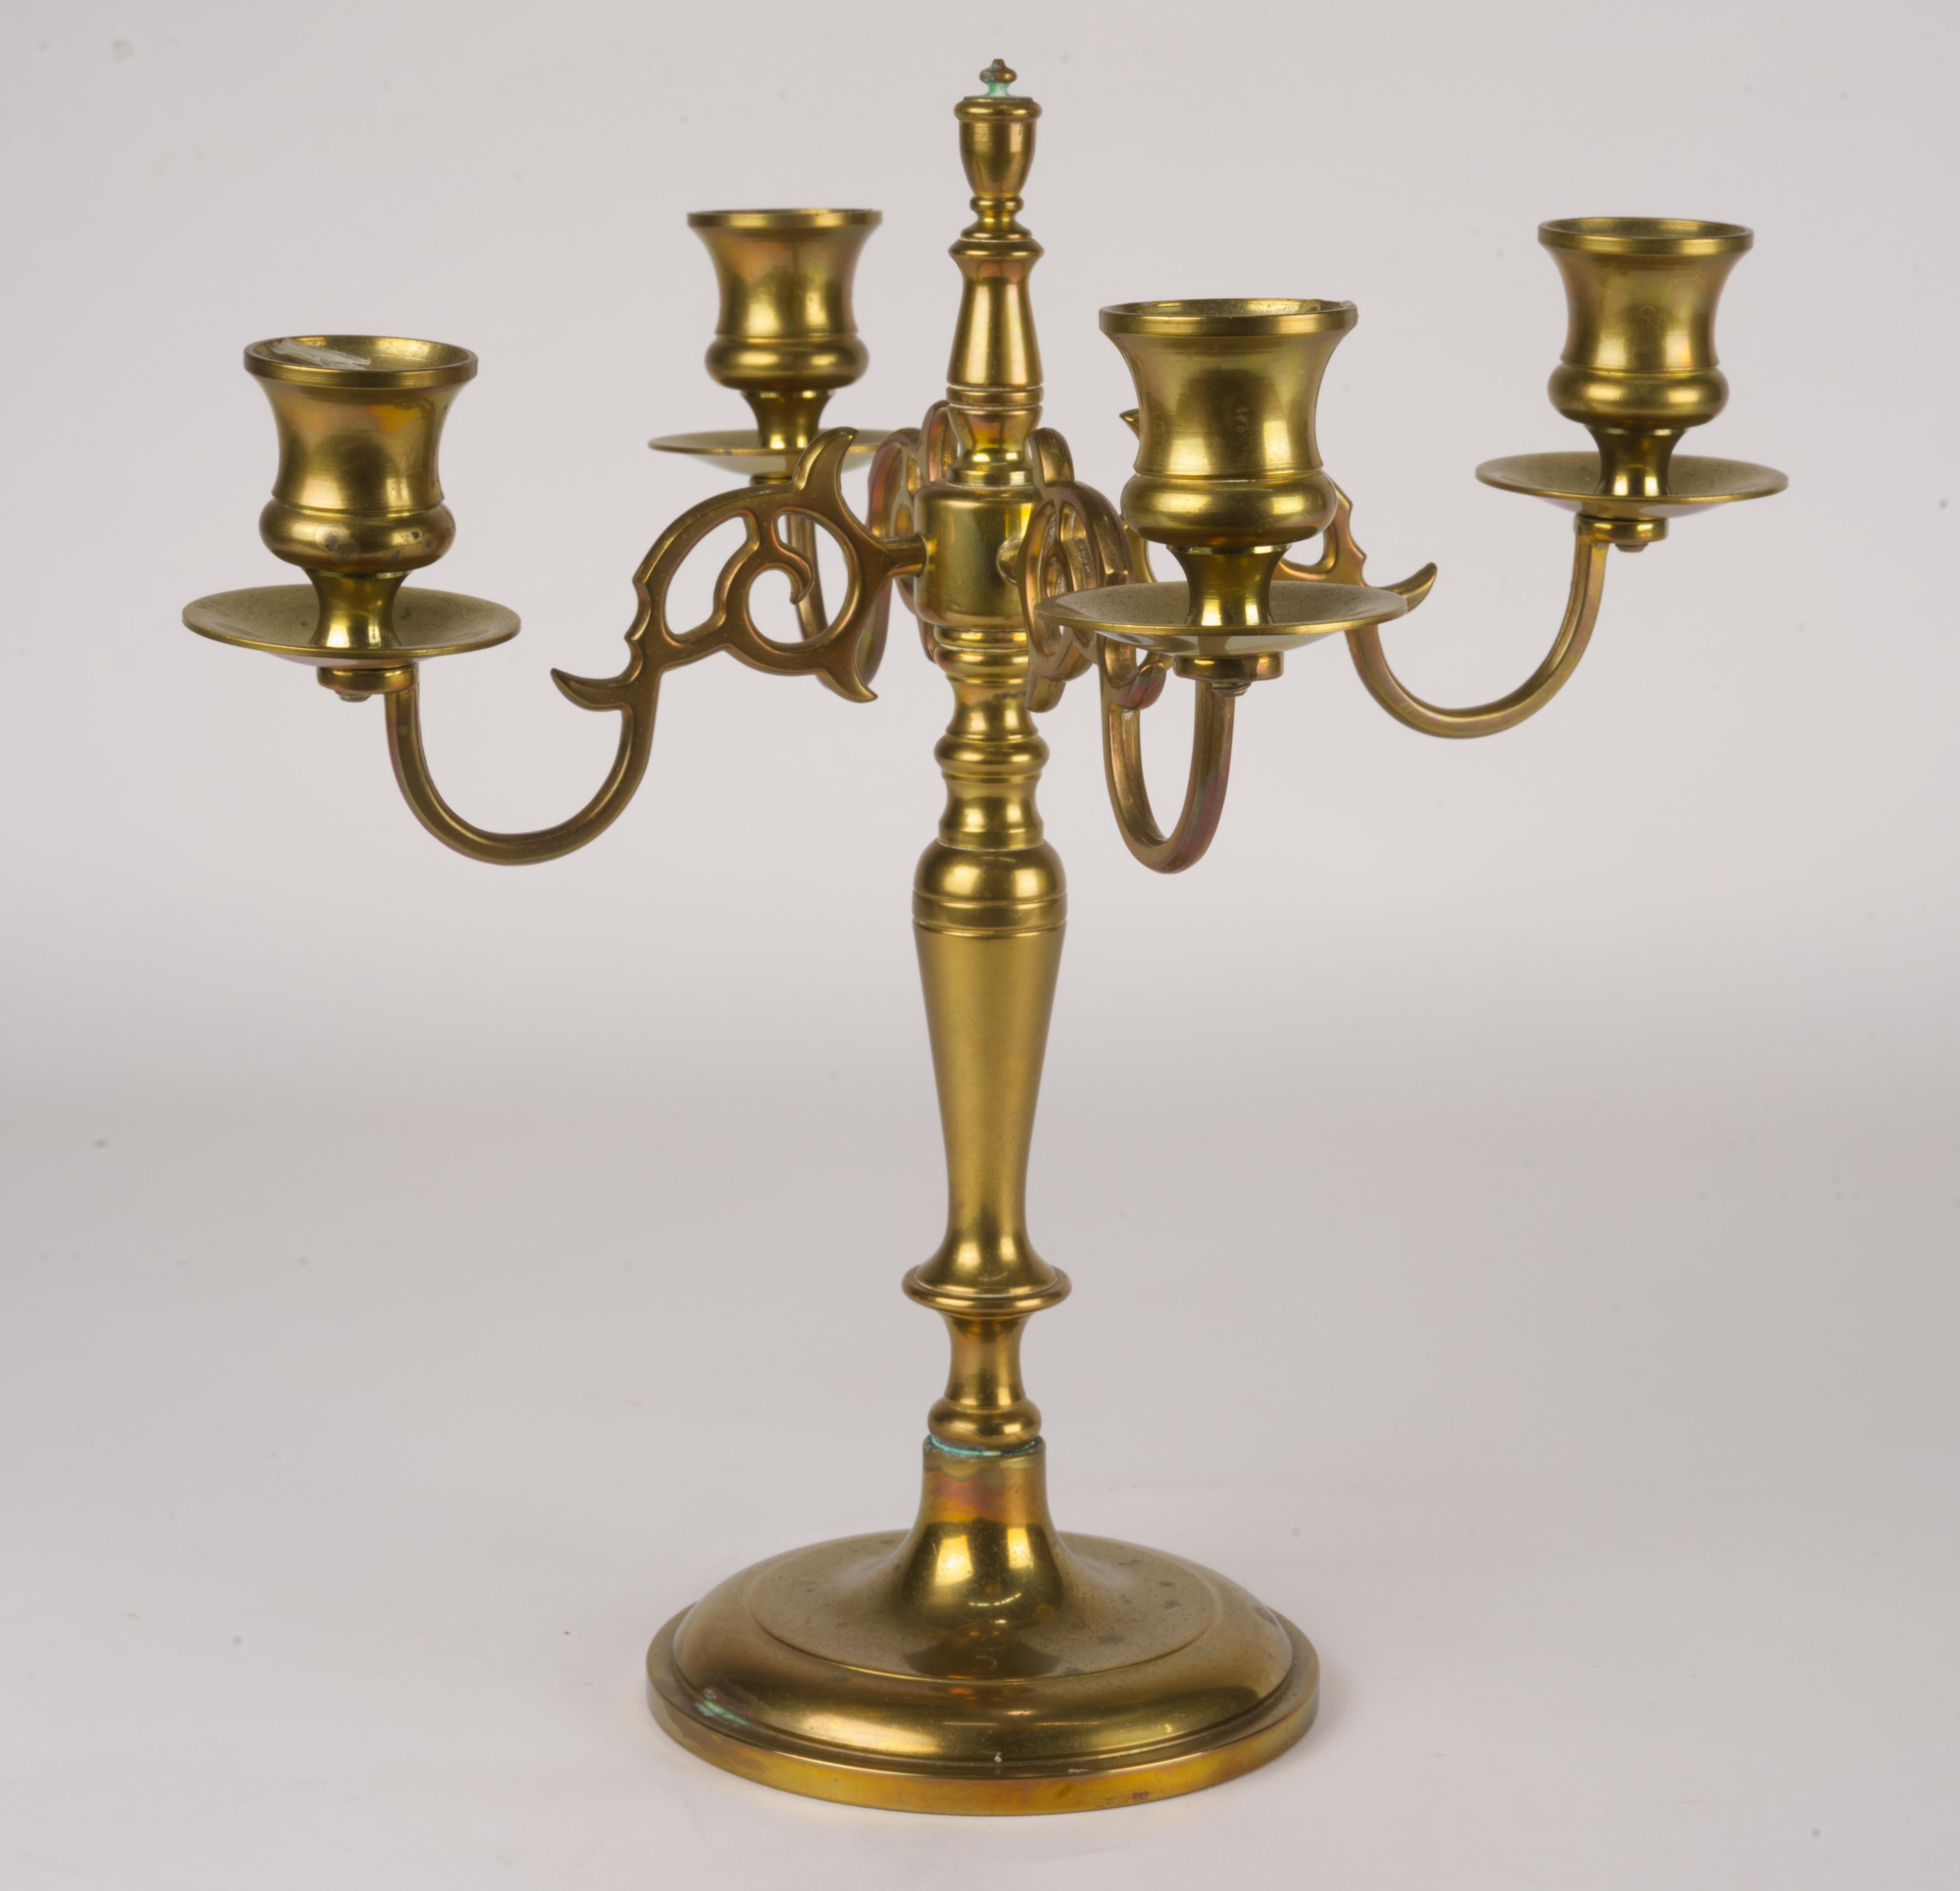  Vintage brass candelabra in continental or traditional style has 4 figurative arms and heavy, stable round base. Each candle holder is fitted with a bobeche to prevent wax drippage. Elegant finial echoes the shape of the stem.

The candelabra is